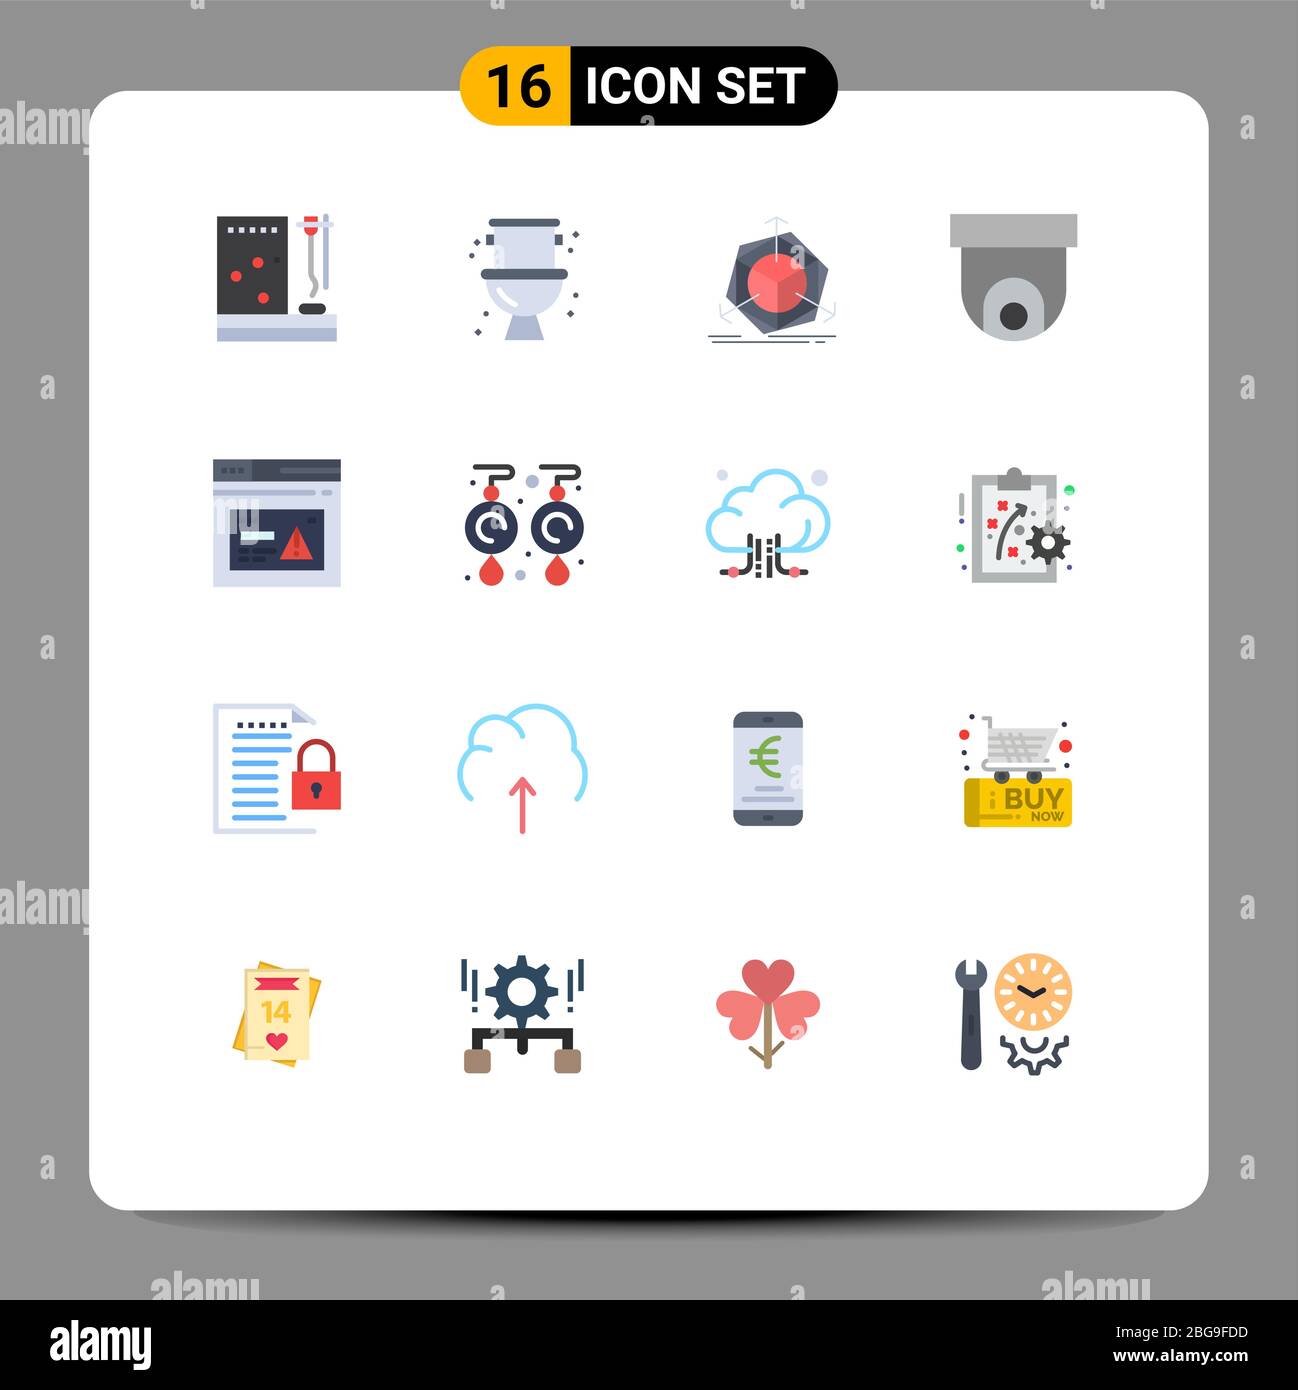 Mobile Interface Flat Color Set of 16 Pictograms of internet, security camera, system, cctv, object Editable Pack of Creative Vector Design Elements Stock Vector